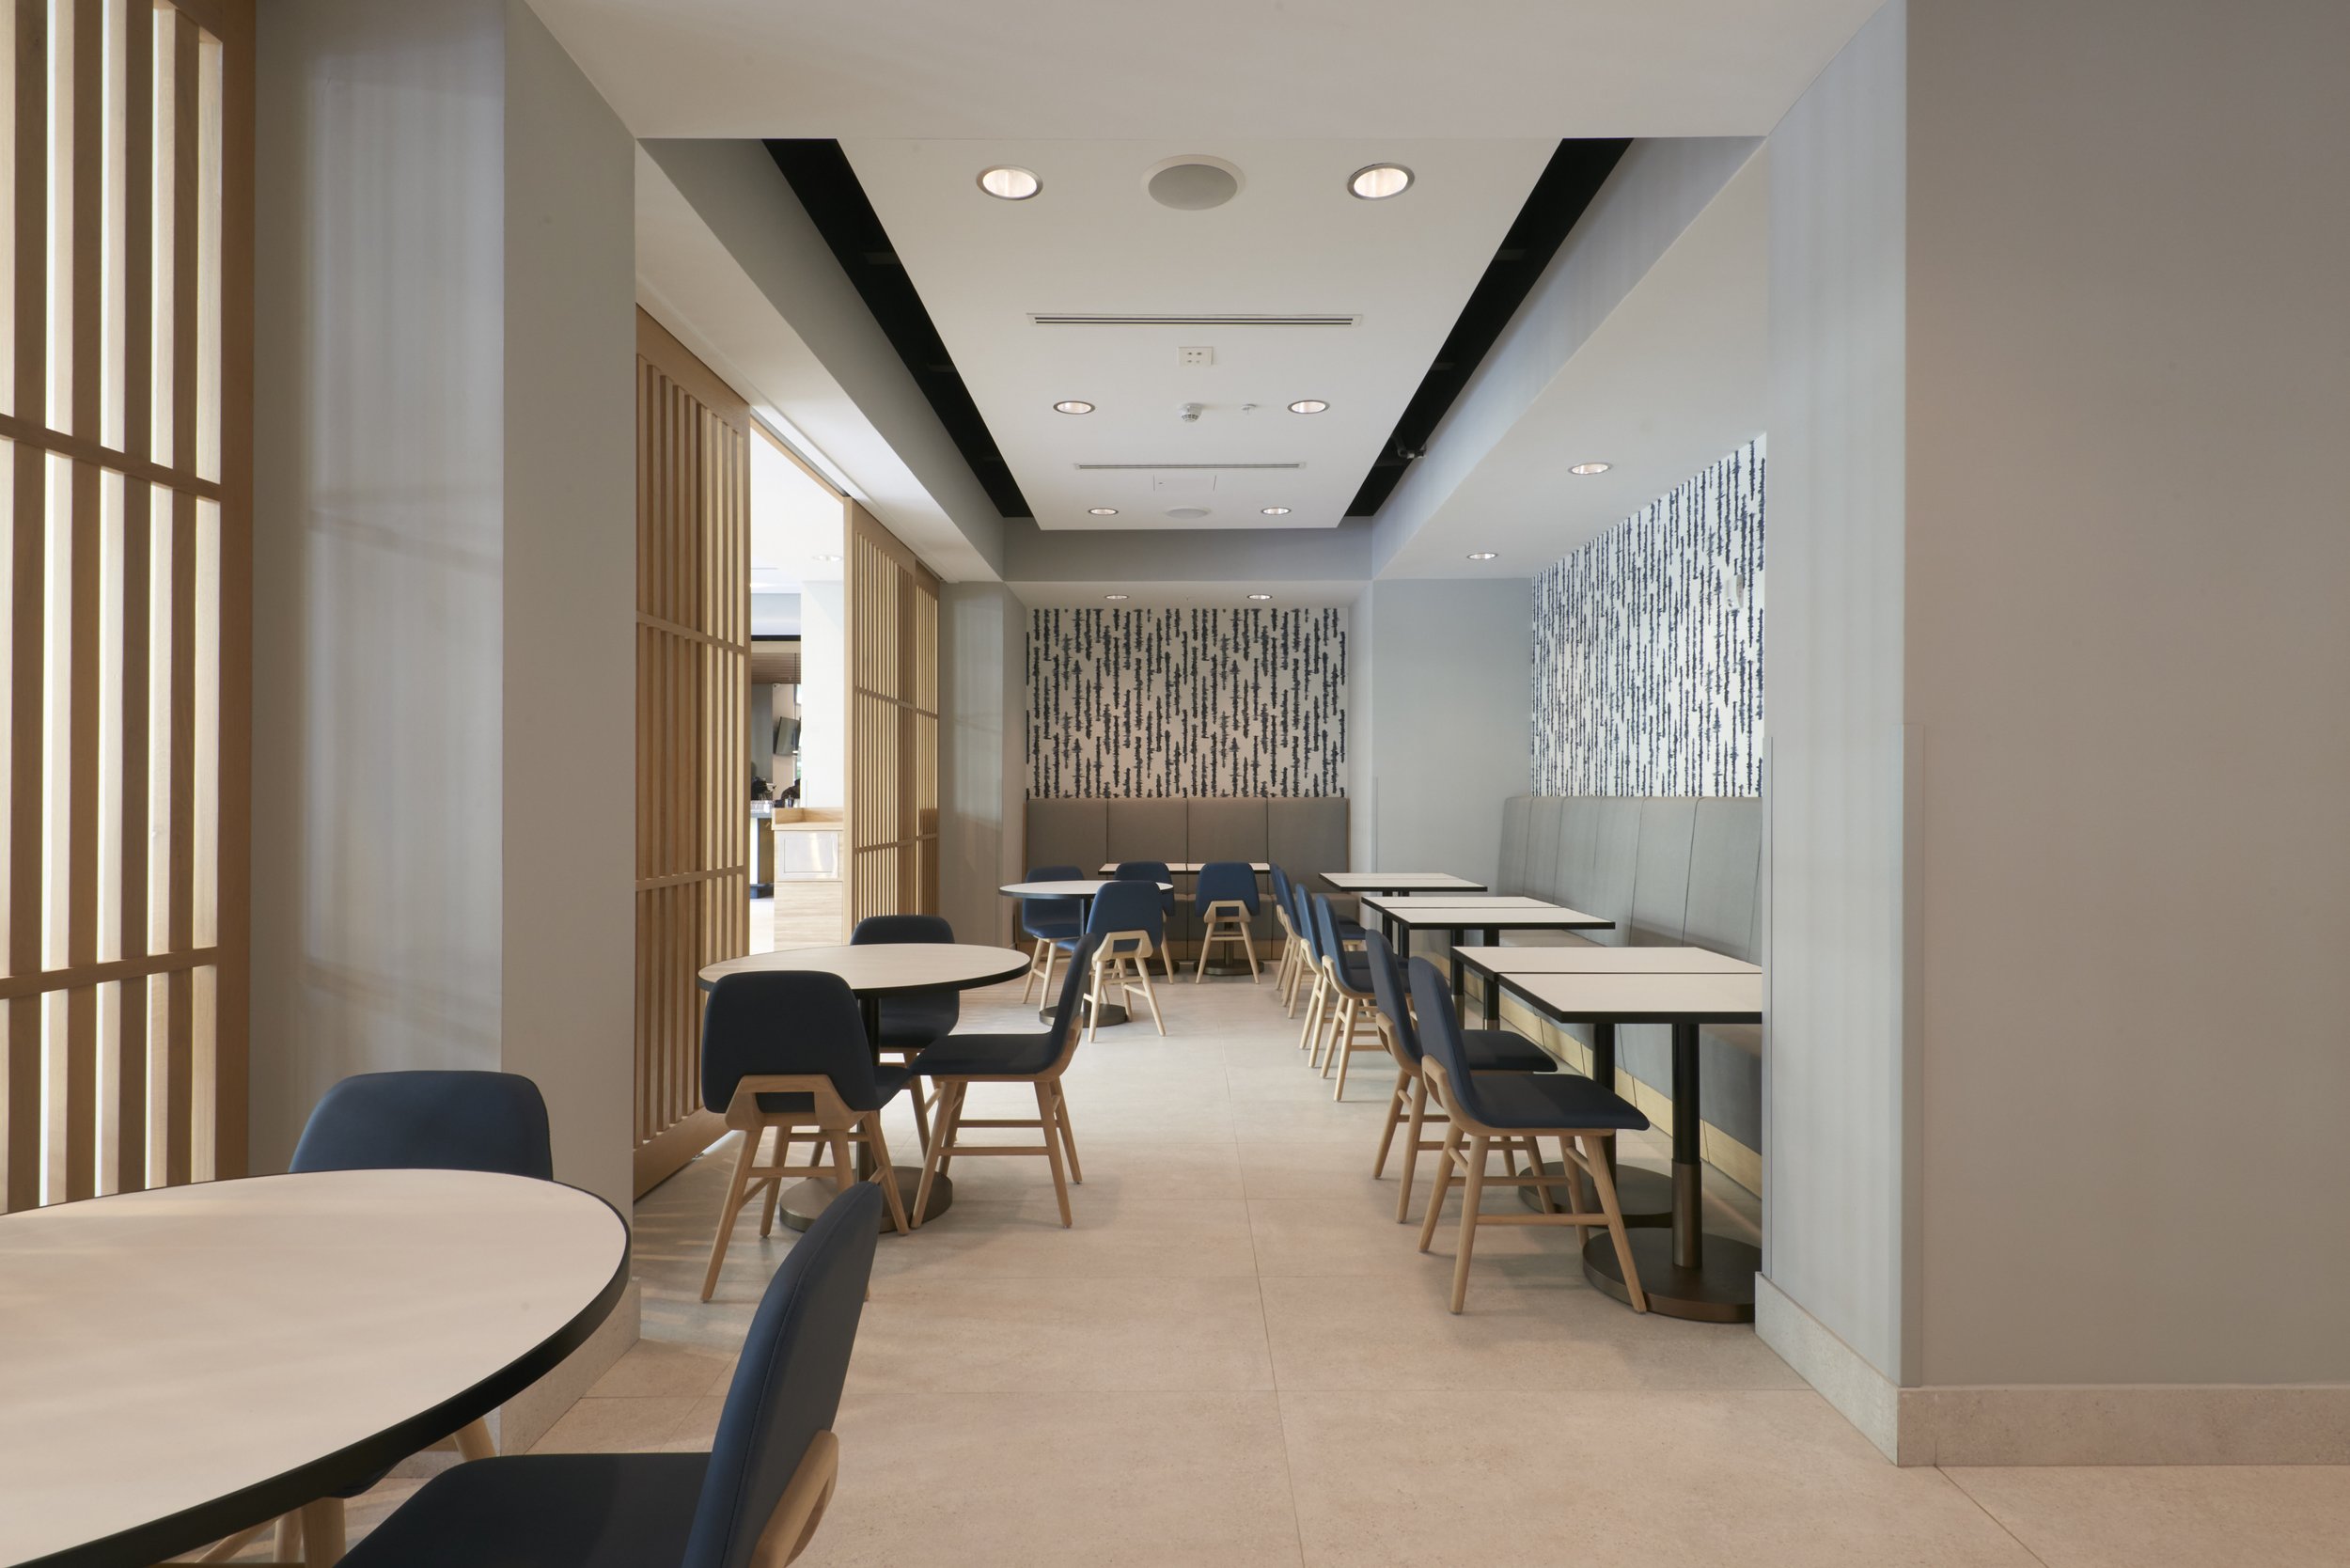  Interior eating area of the Residence Inn by Marriott hospitality project. 